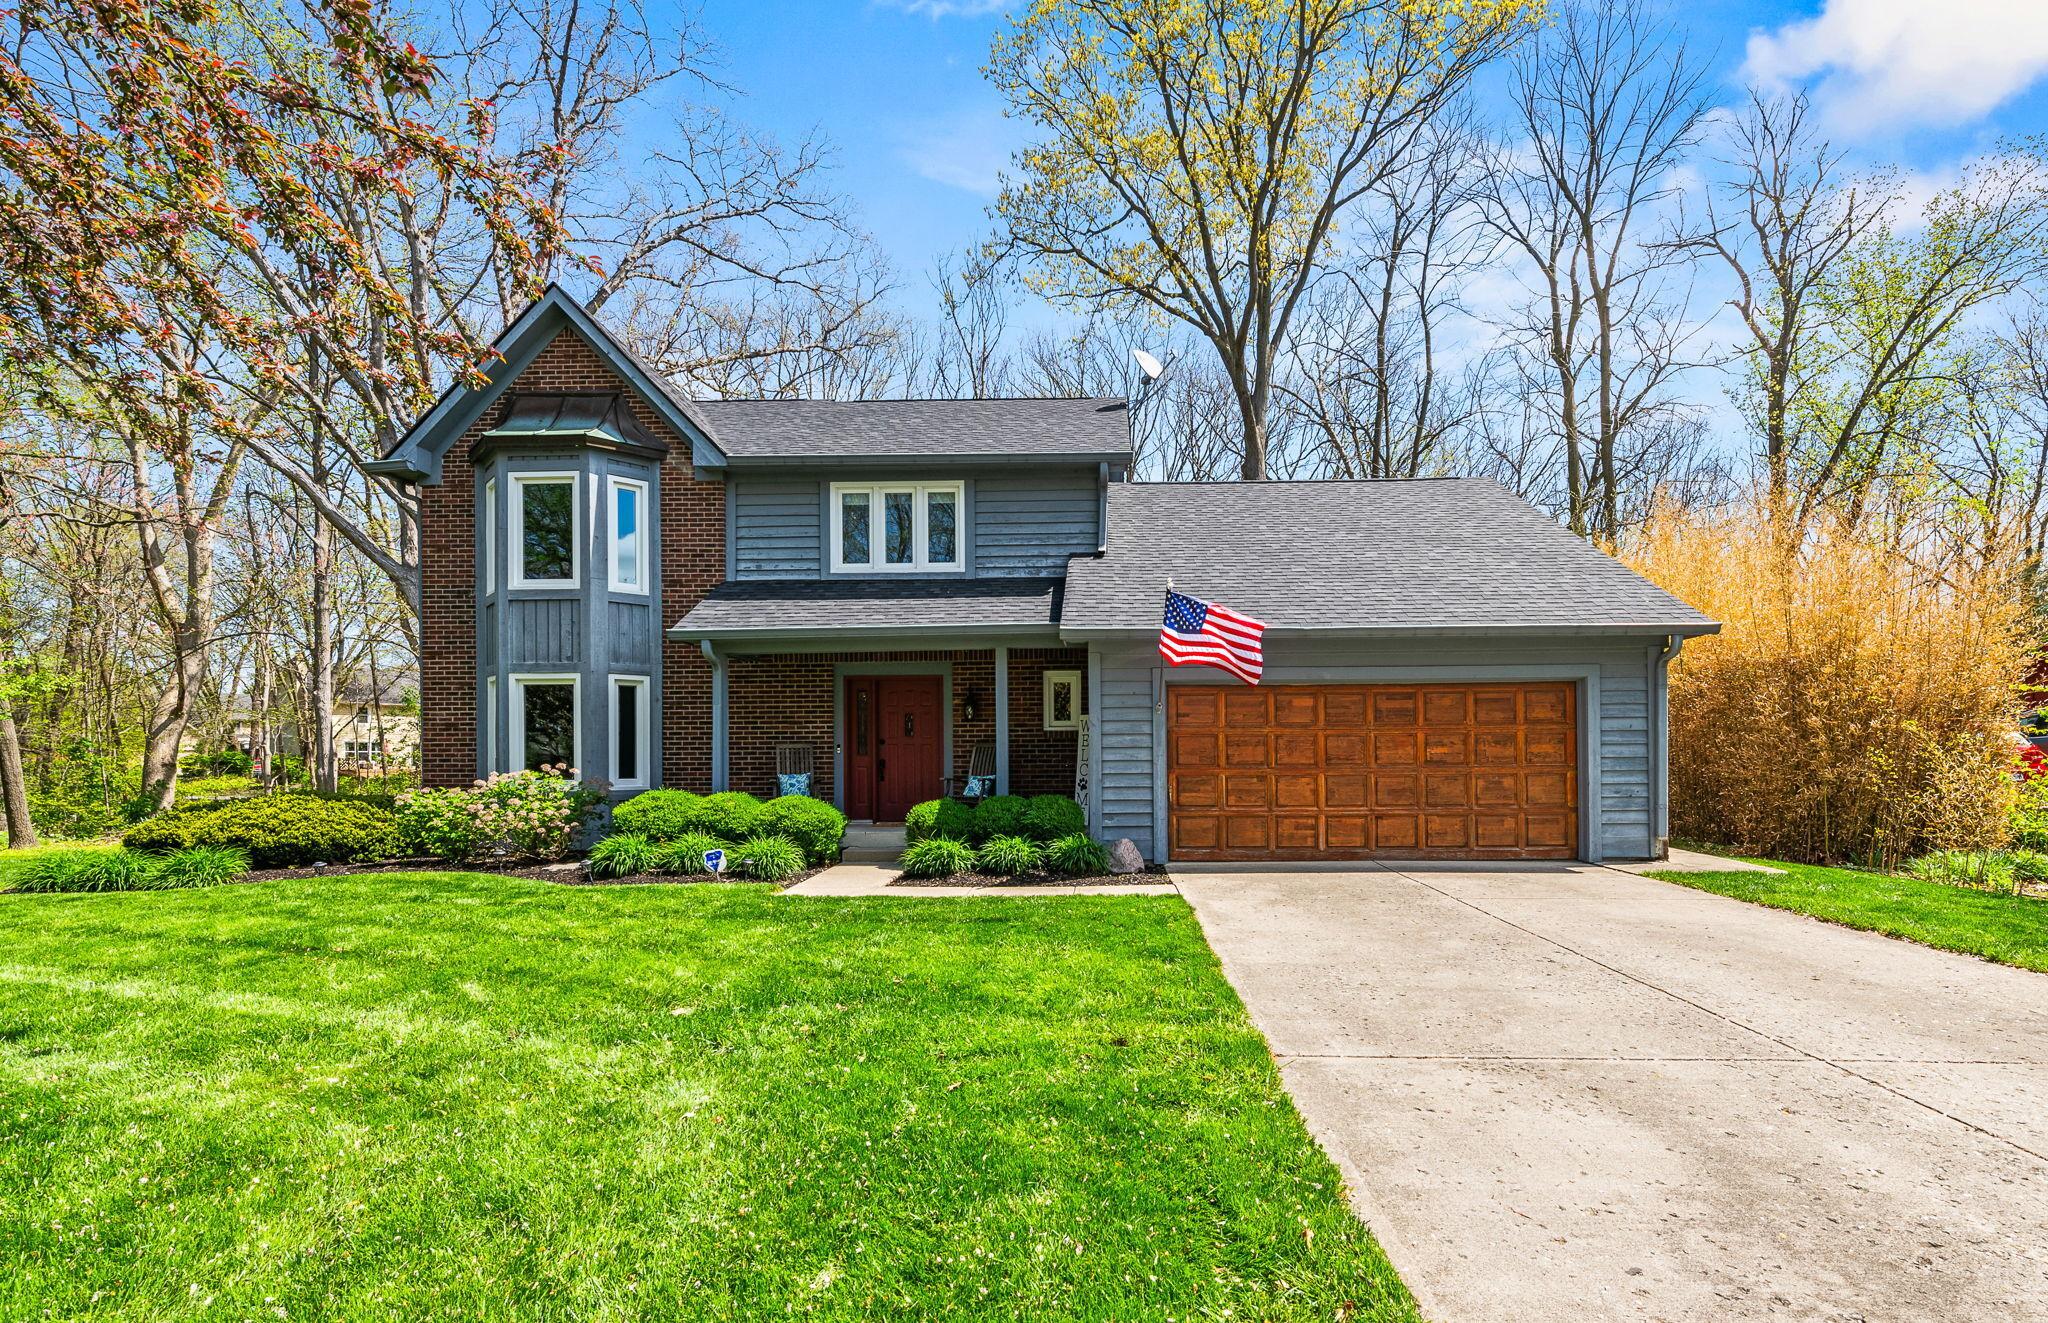 Photo one of 499 Banbury Rd Noblesville IN 46062 | MLS 21974328